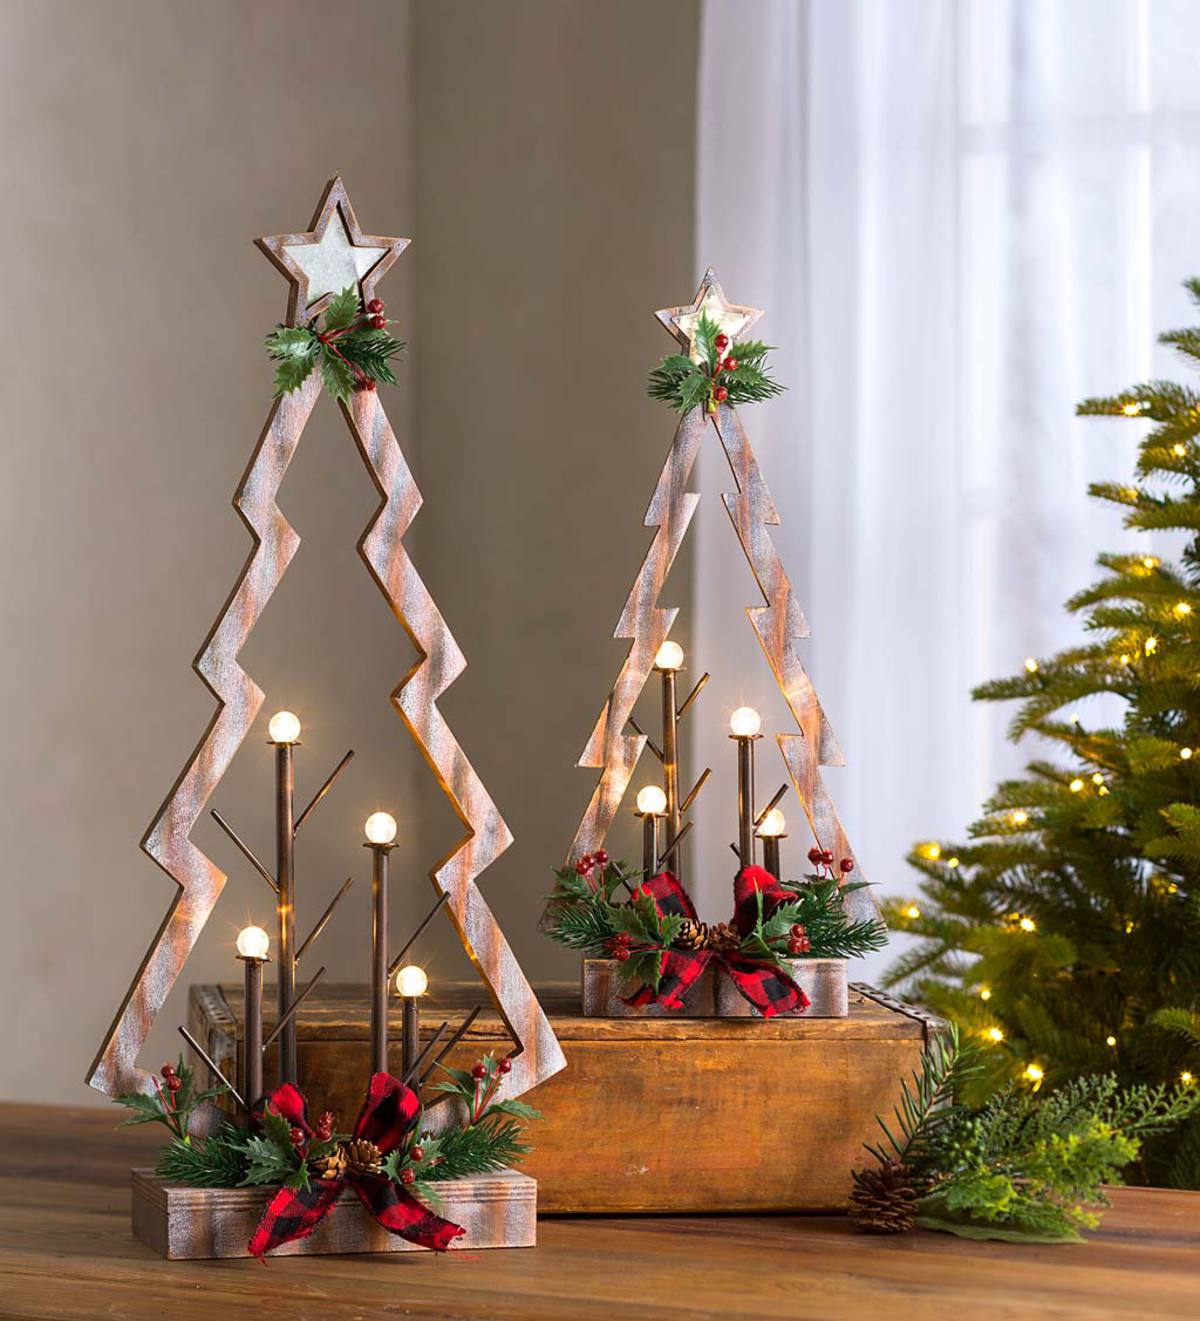 Tabletop Lighted Wooden Christmas Trees, Set of 2 | Wind and Weather